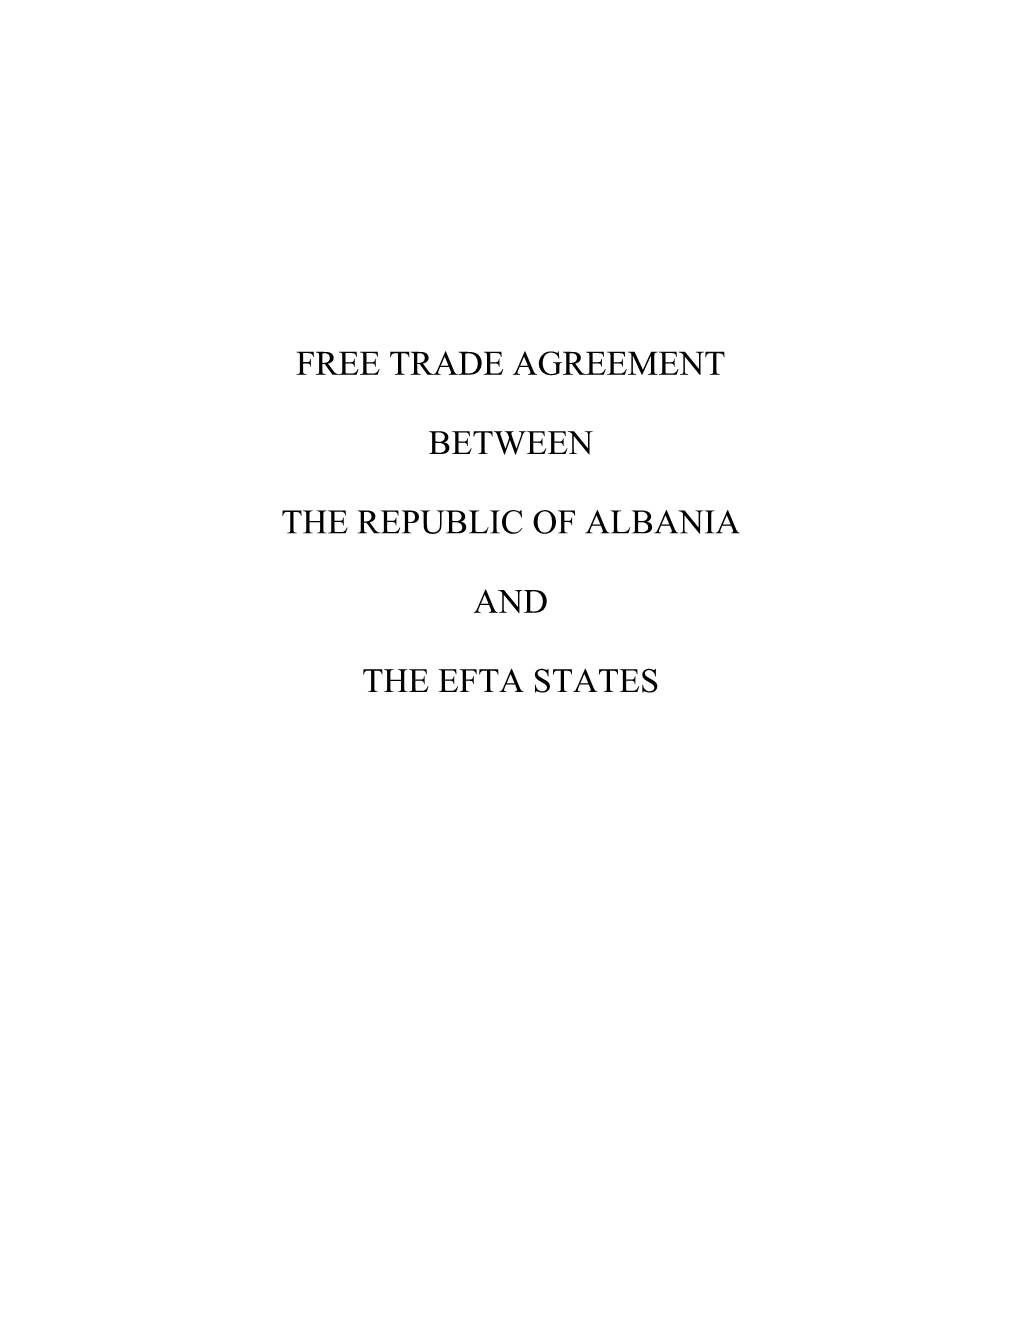 Free Trade Agreement Between the Republic Of